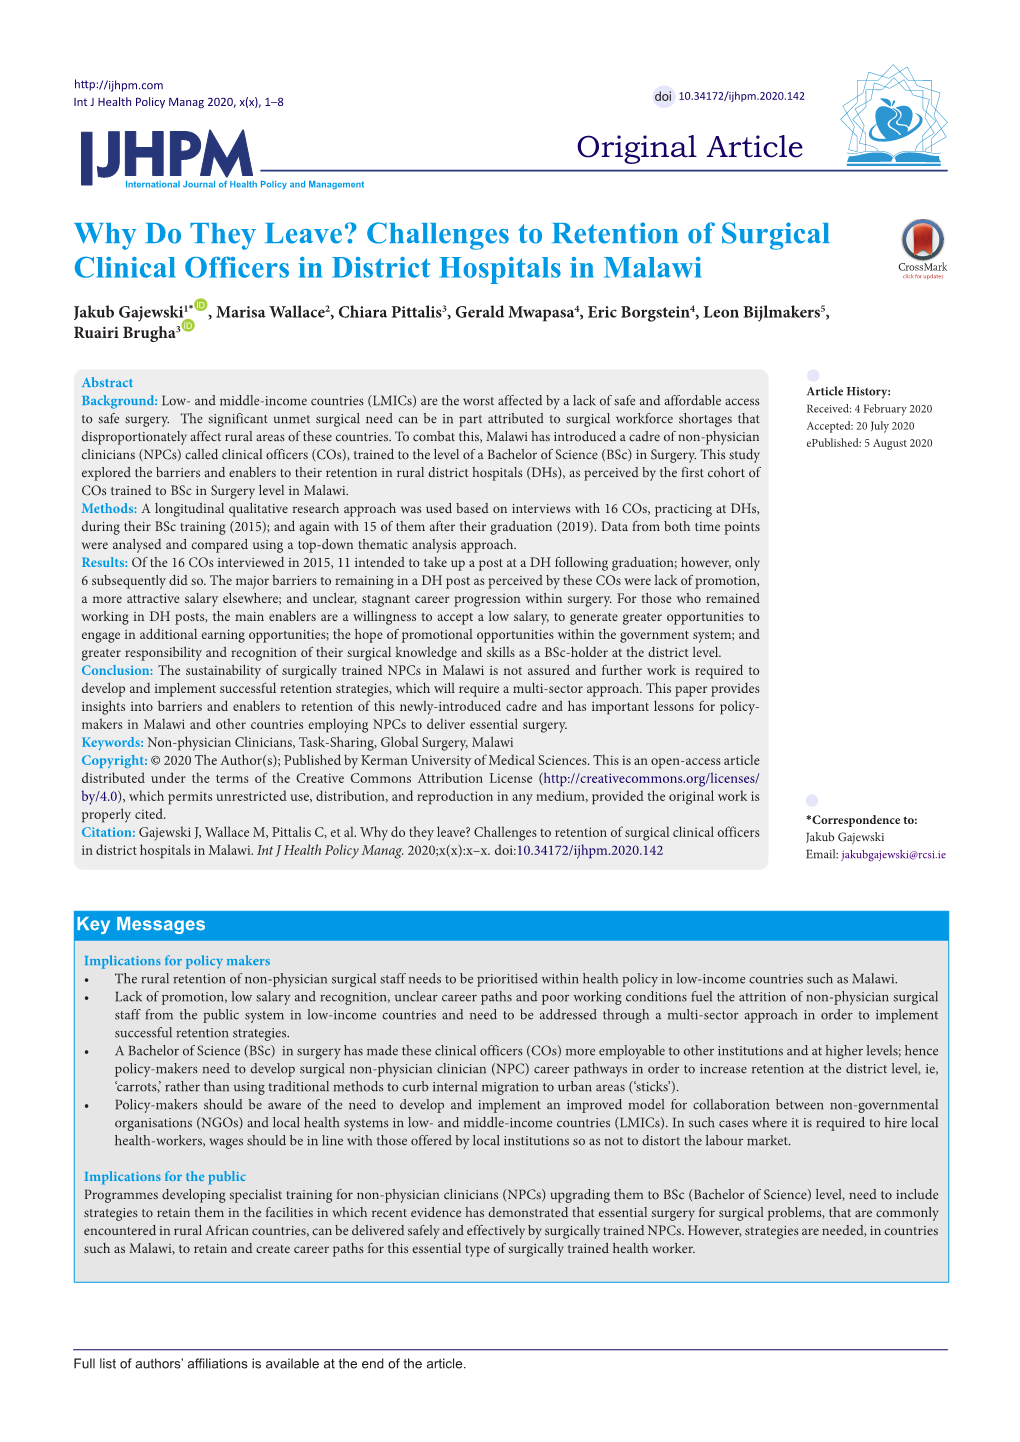 Why Do They Leave? Challenges to Retention of Surgical Clinical Officers in District Hospitals in Malawi